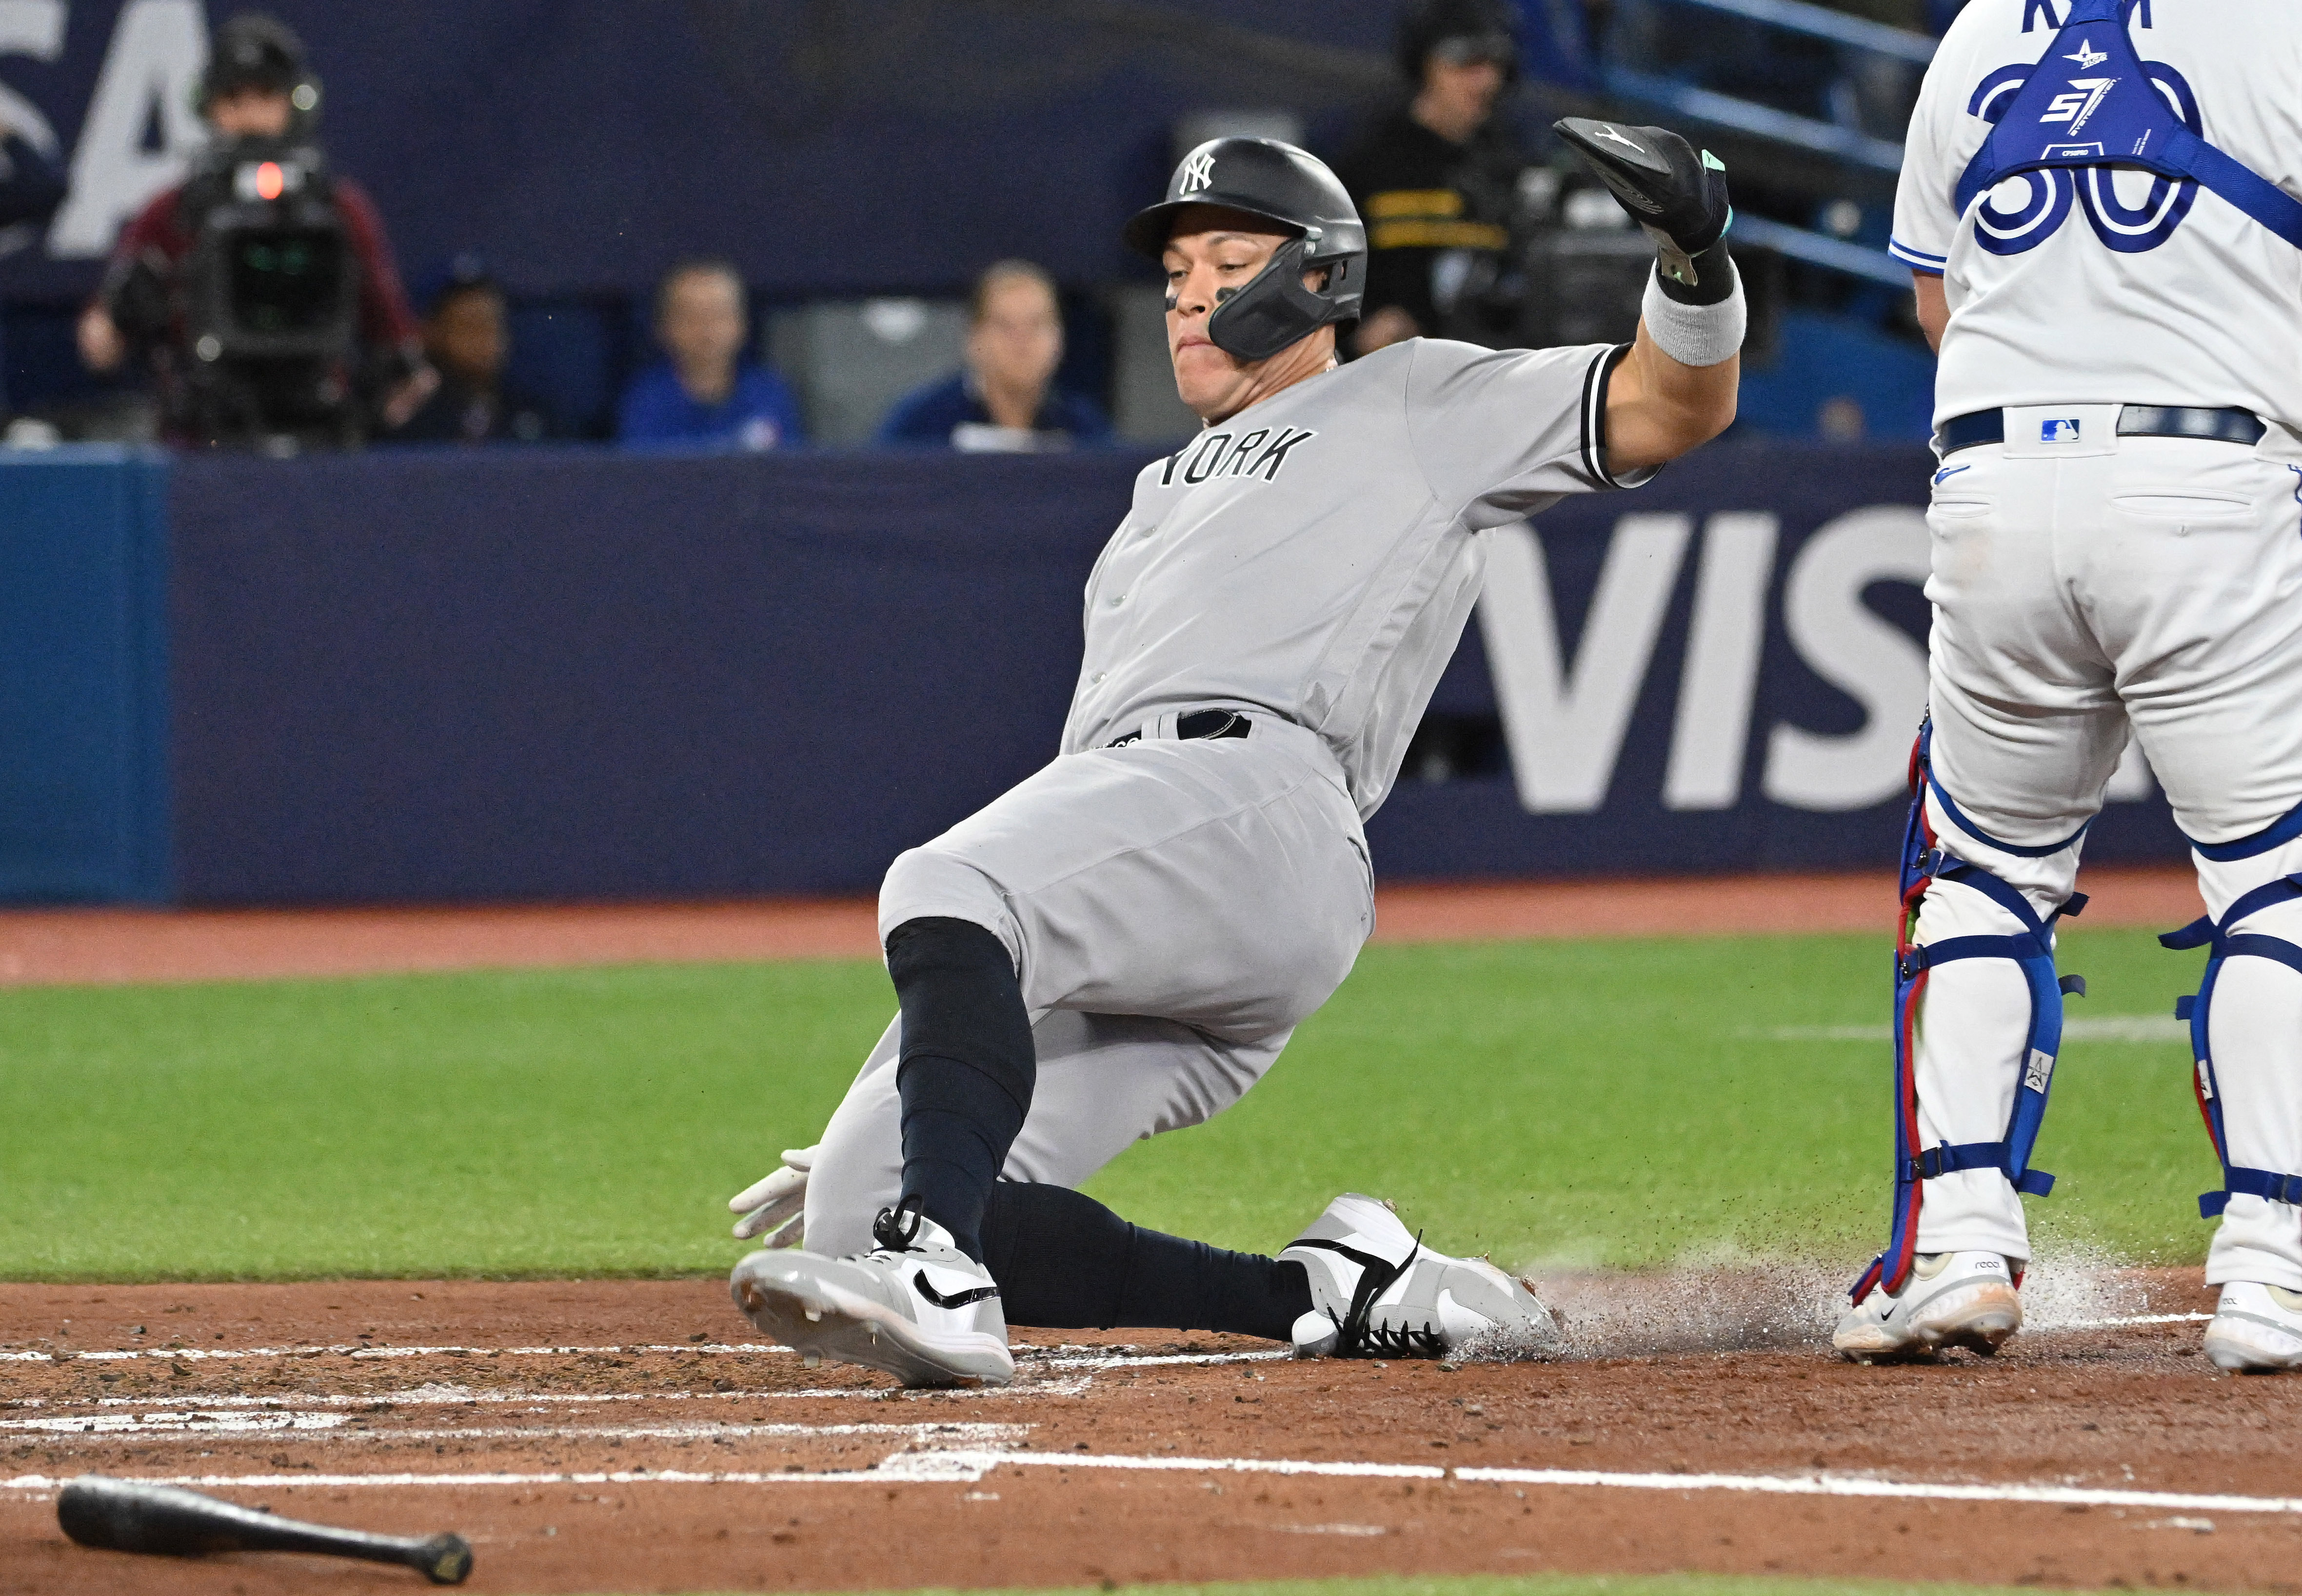 Aaron Judge belts another homer vs. Blue Jays as Yankees win series